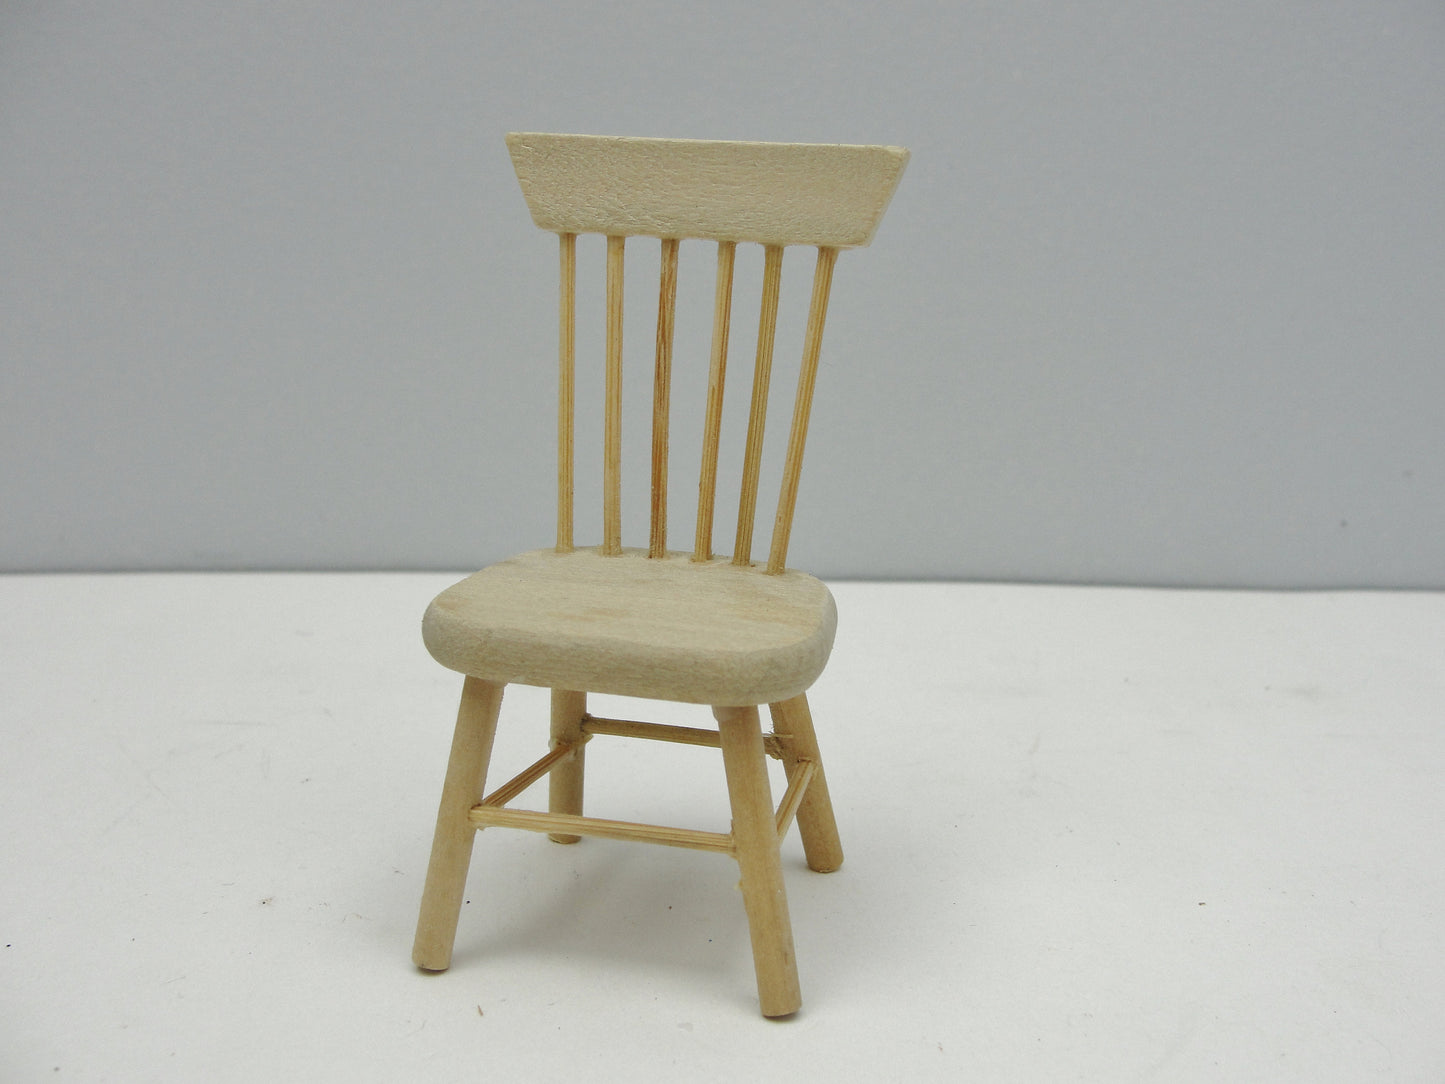 Dollhouse furniture miniature dining chair - Miniatures - Craft Supply House